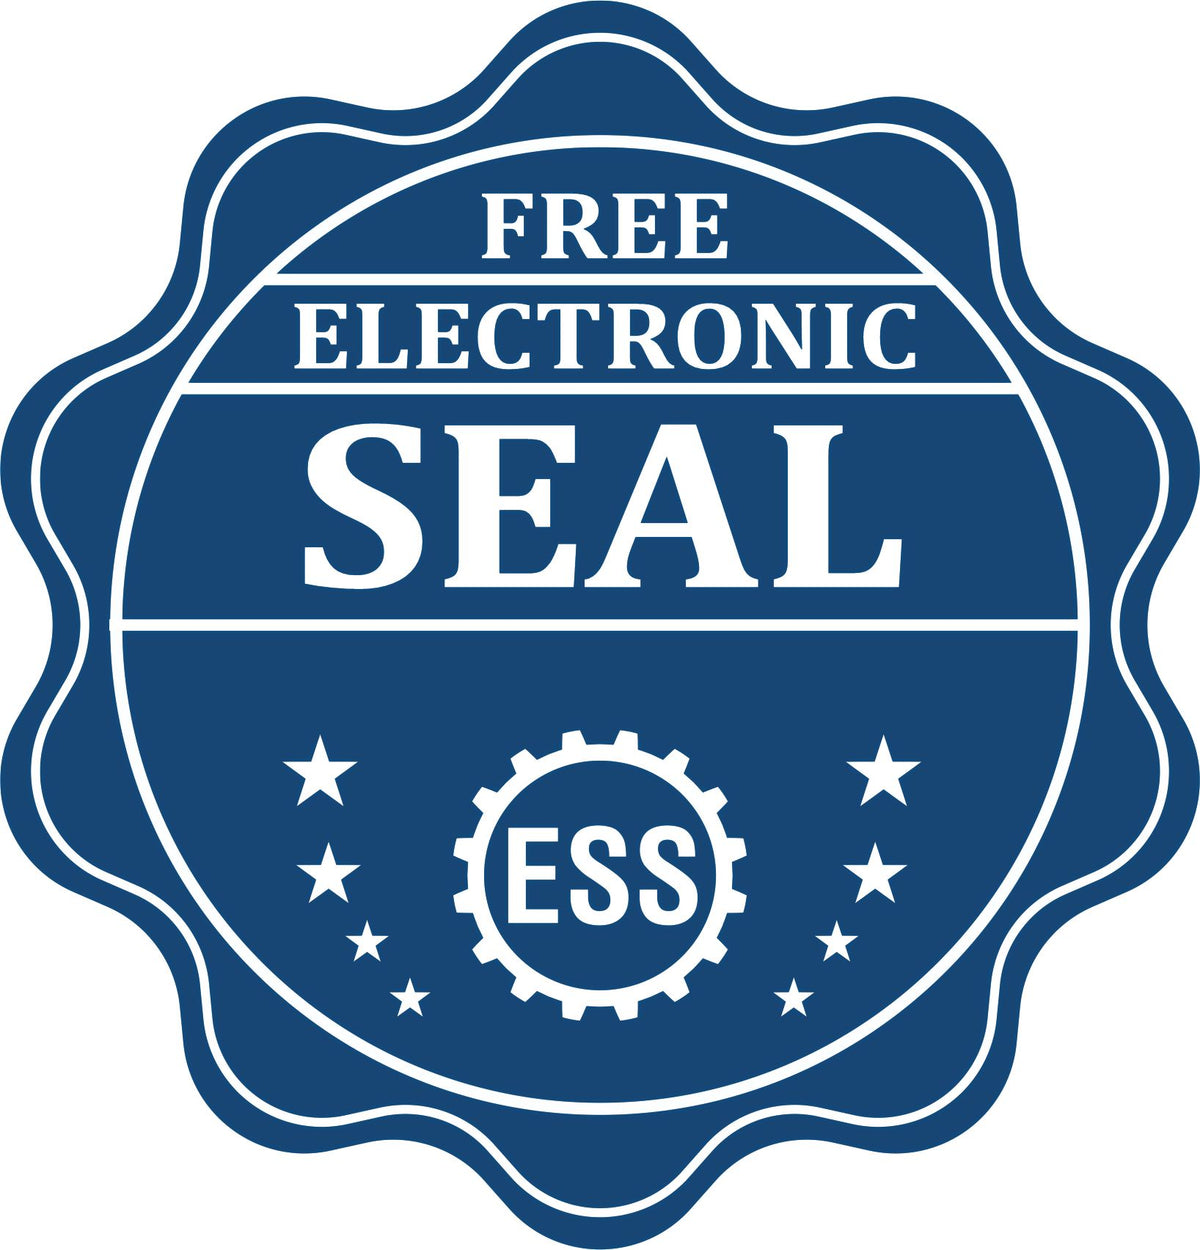 A badge showing a free electronic seal for the Slim Pre-Inked Rectangular Notary Stamp for Washington with stars and the ESS gear on the emblem.